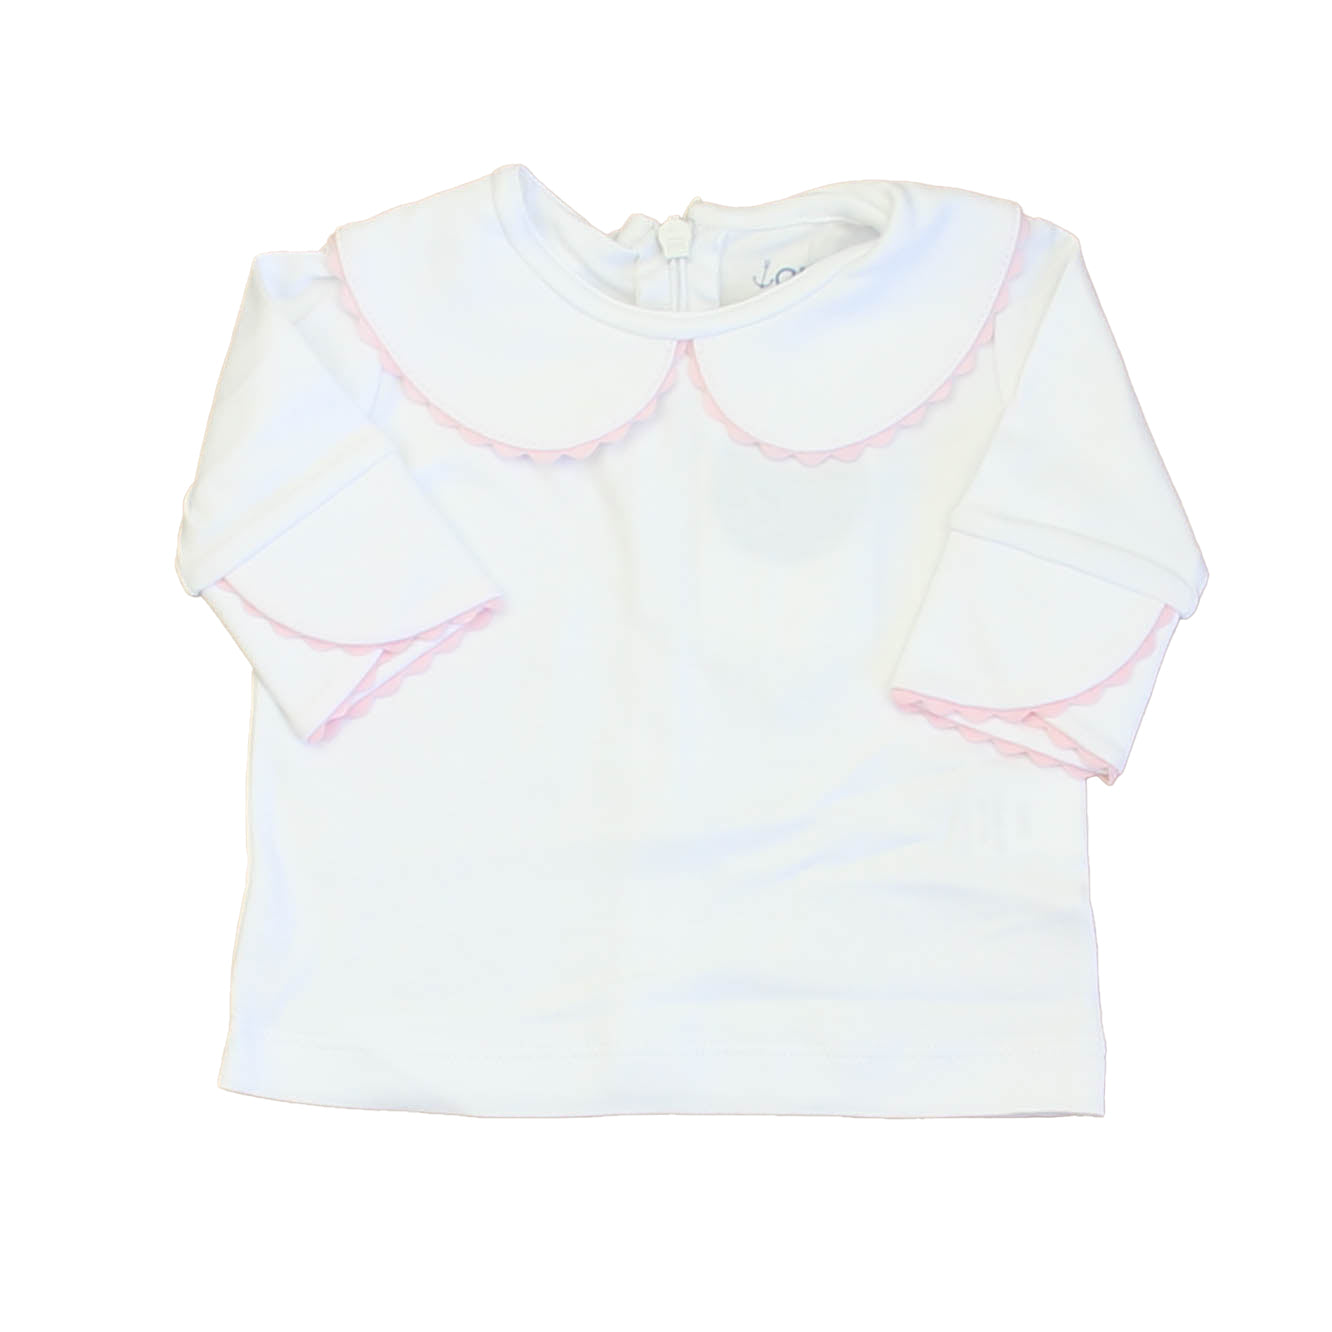 Bright White with Lillys Pink / 12-18 months